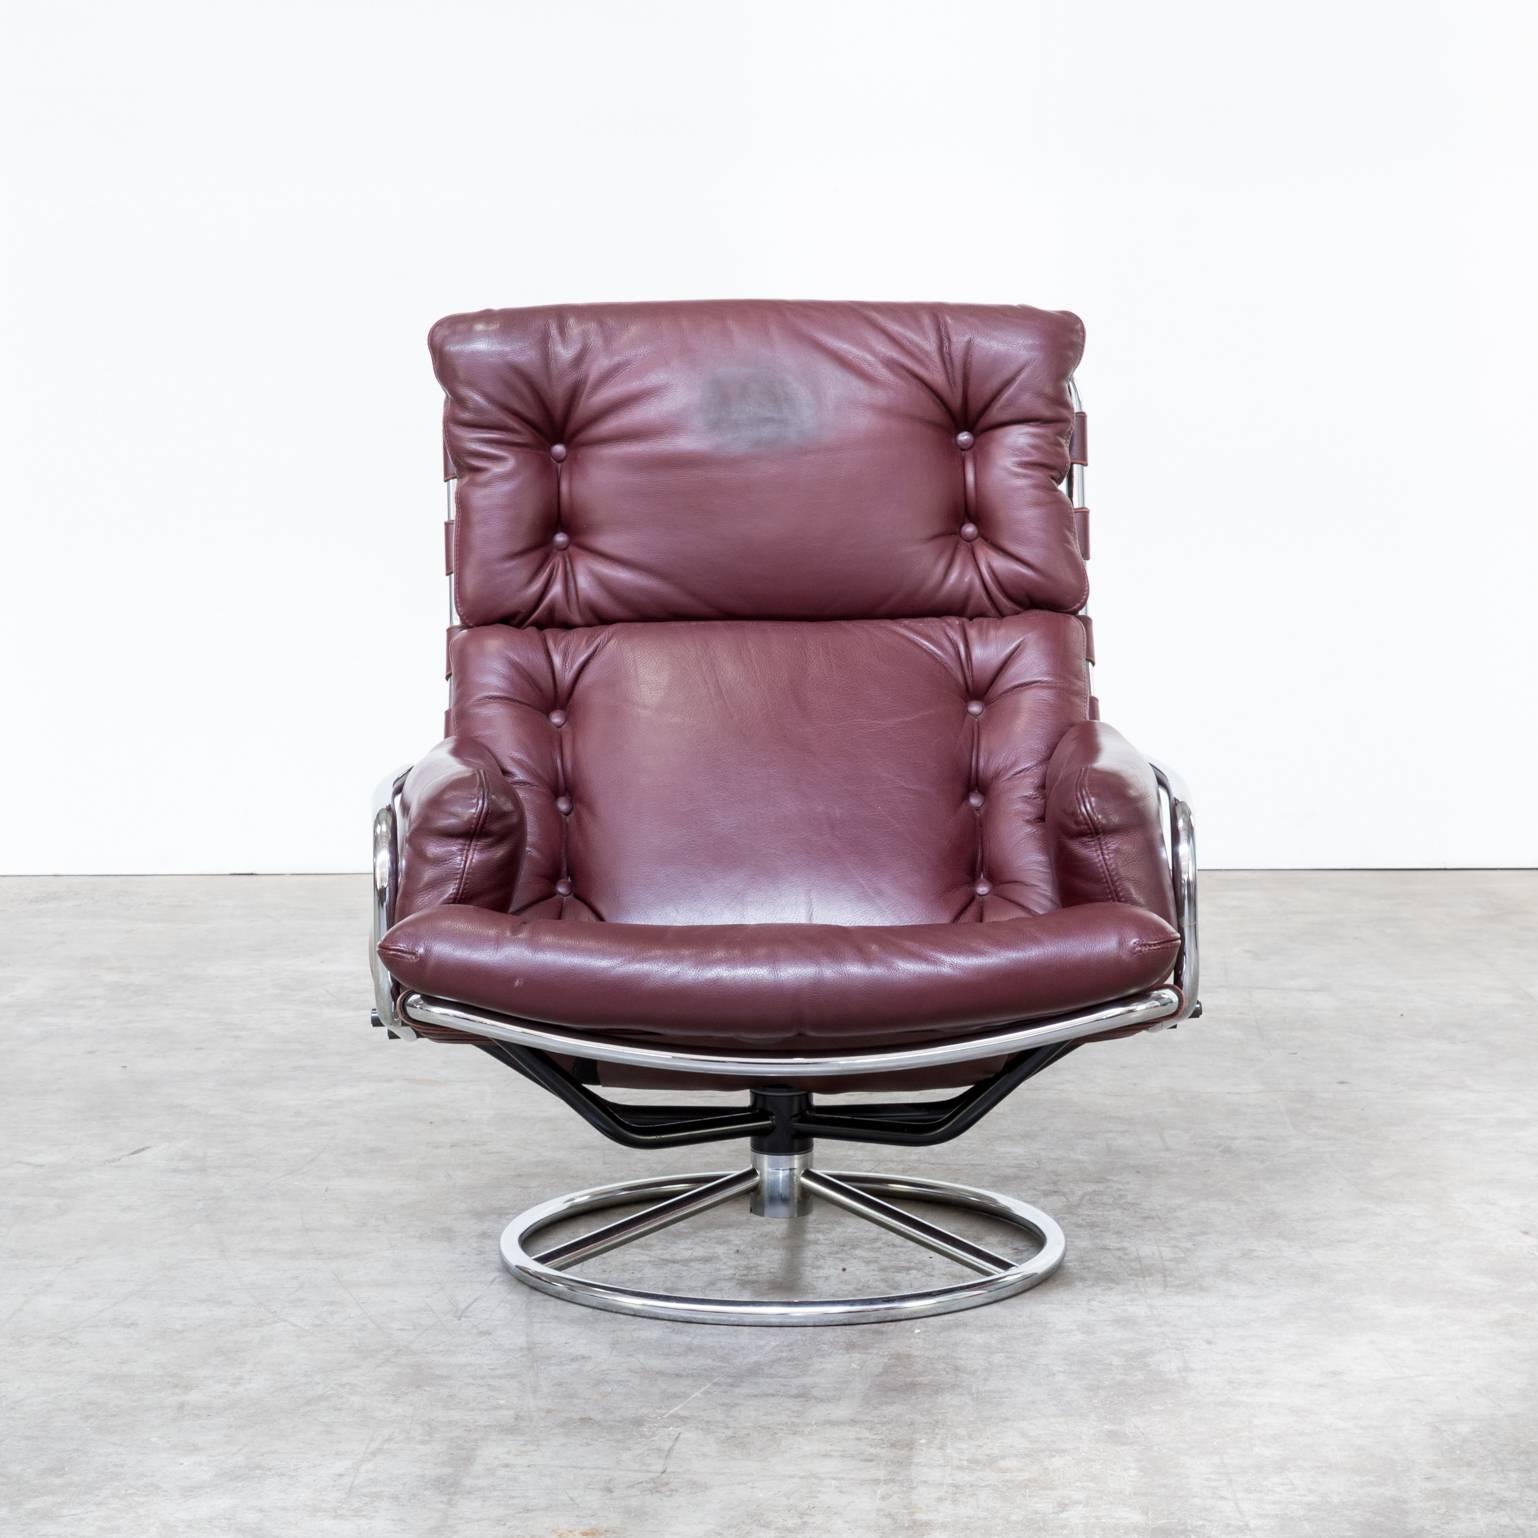 1970s Martin Visser SZ19 Tanabe fauteuil for ’t Spectrum. Rare ’tanabe’ model. This item is also part of the collection of the Textilemuseum in Tilburg the Netherlands.